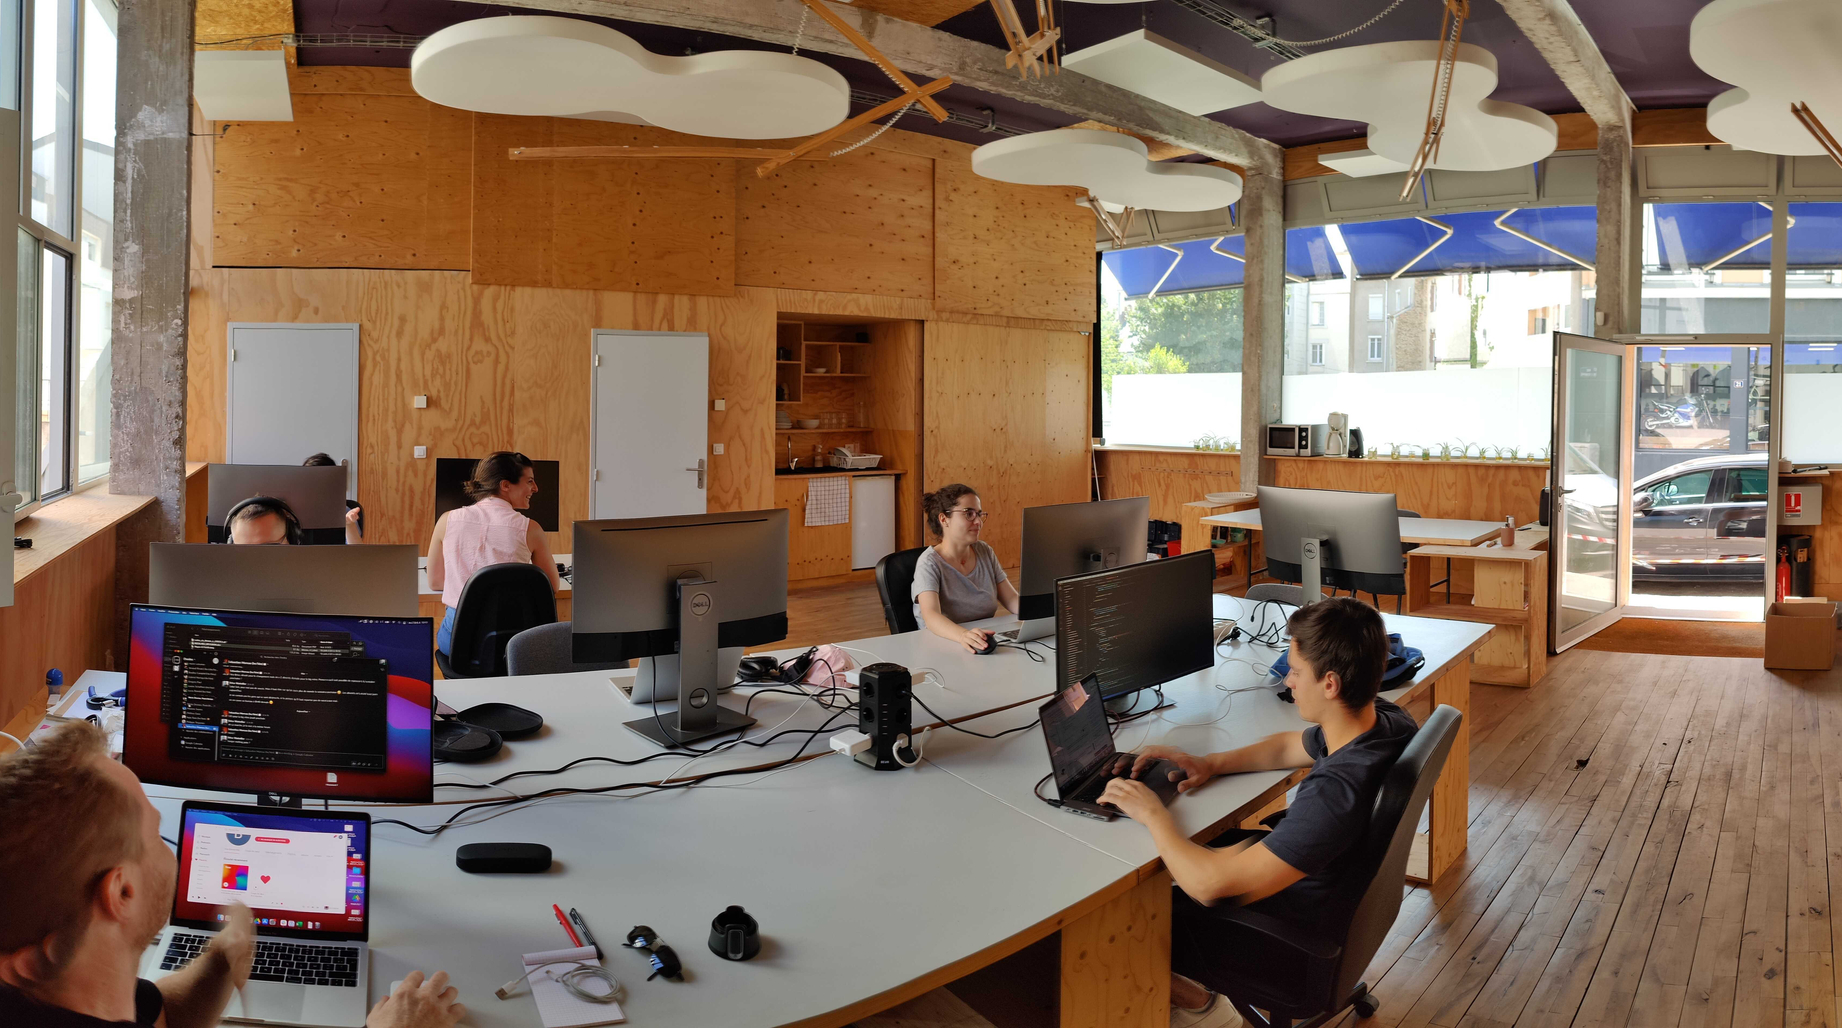 Our France office with team working